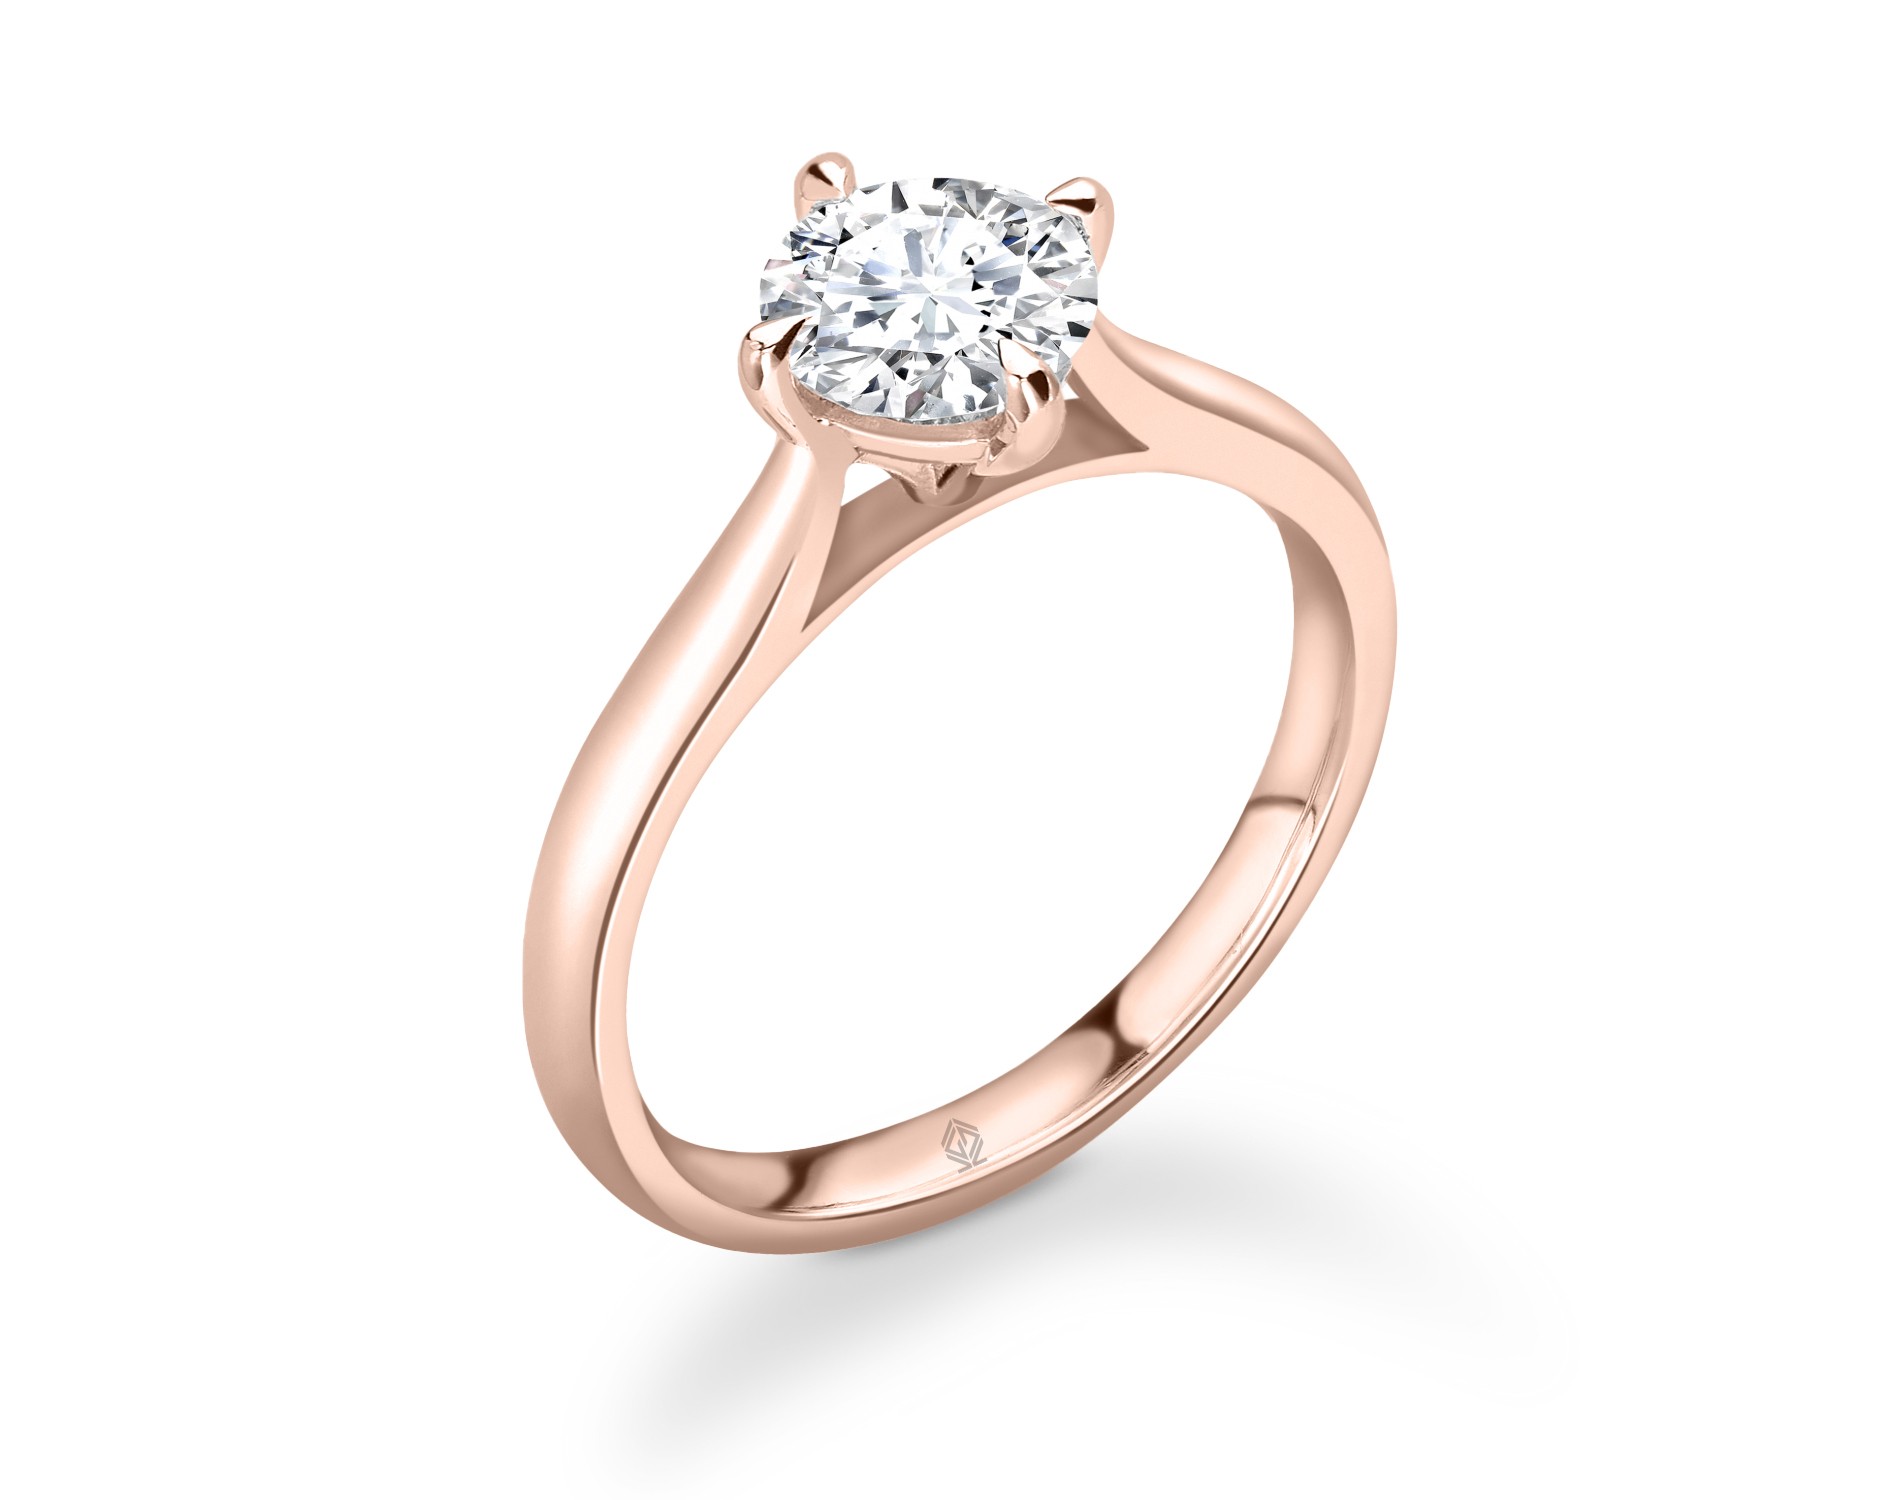 18K ROSE GOLD ROUND CUT 4 PRONGS SOLITAIRE DIAMOND ENGAGEMENT RING